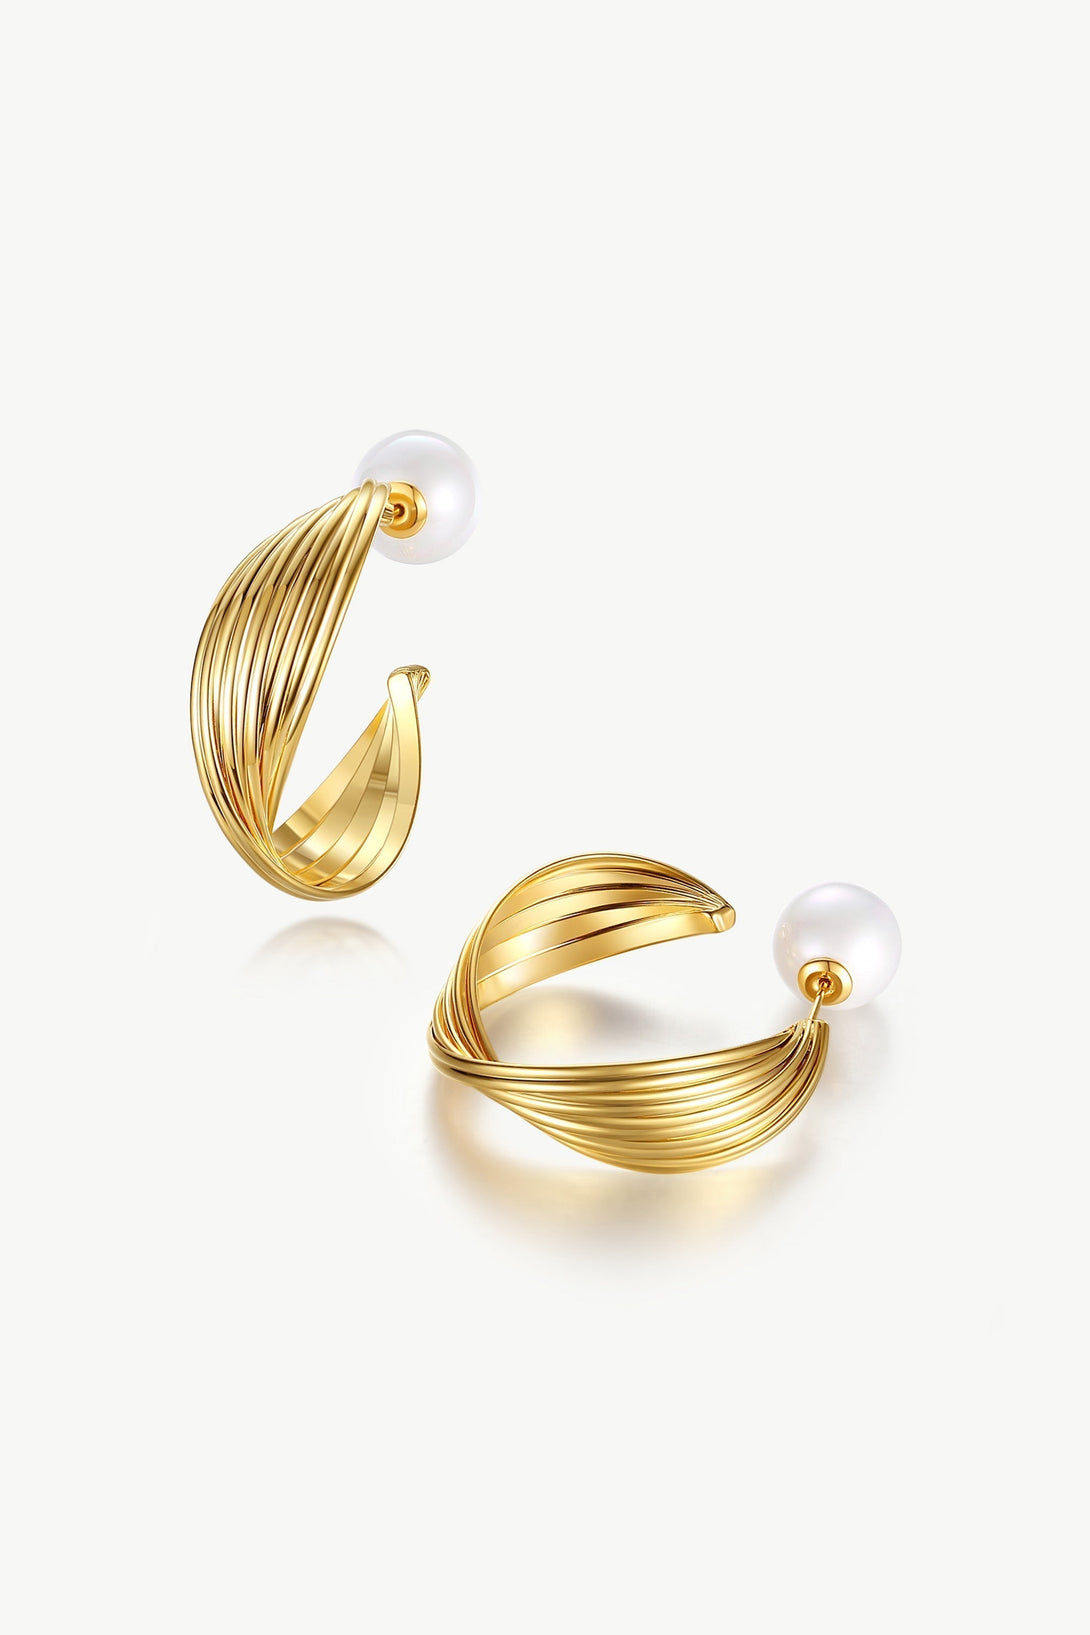 Gold Twisted Wave Hoop Earrings - Classicharms